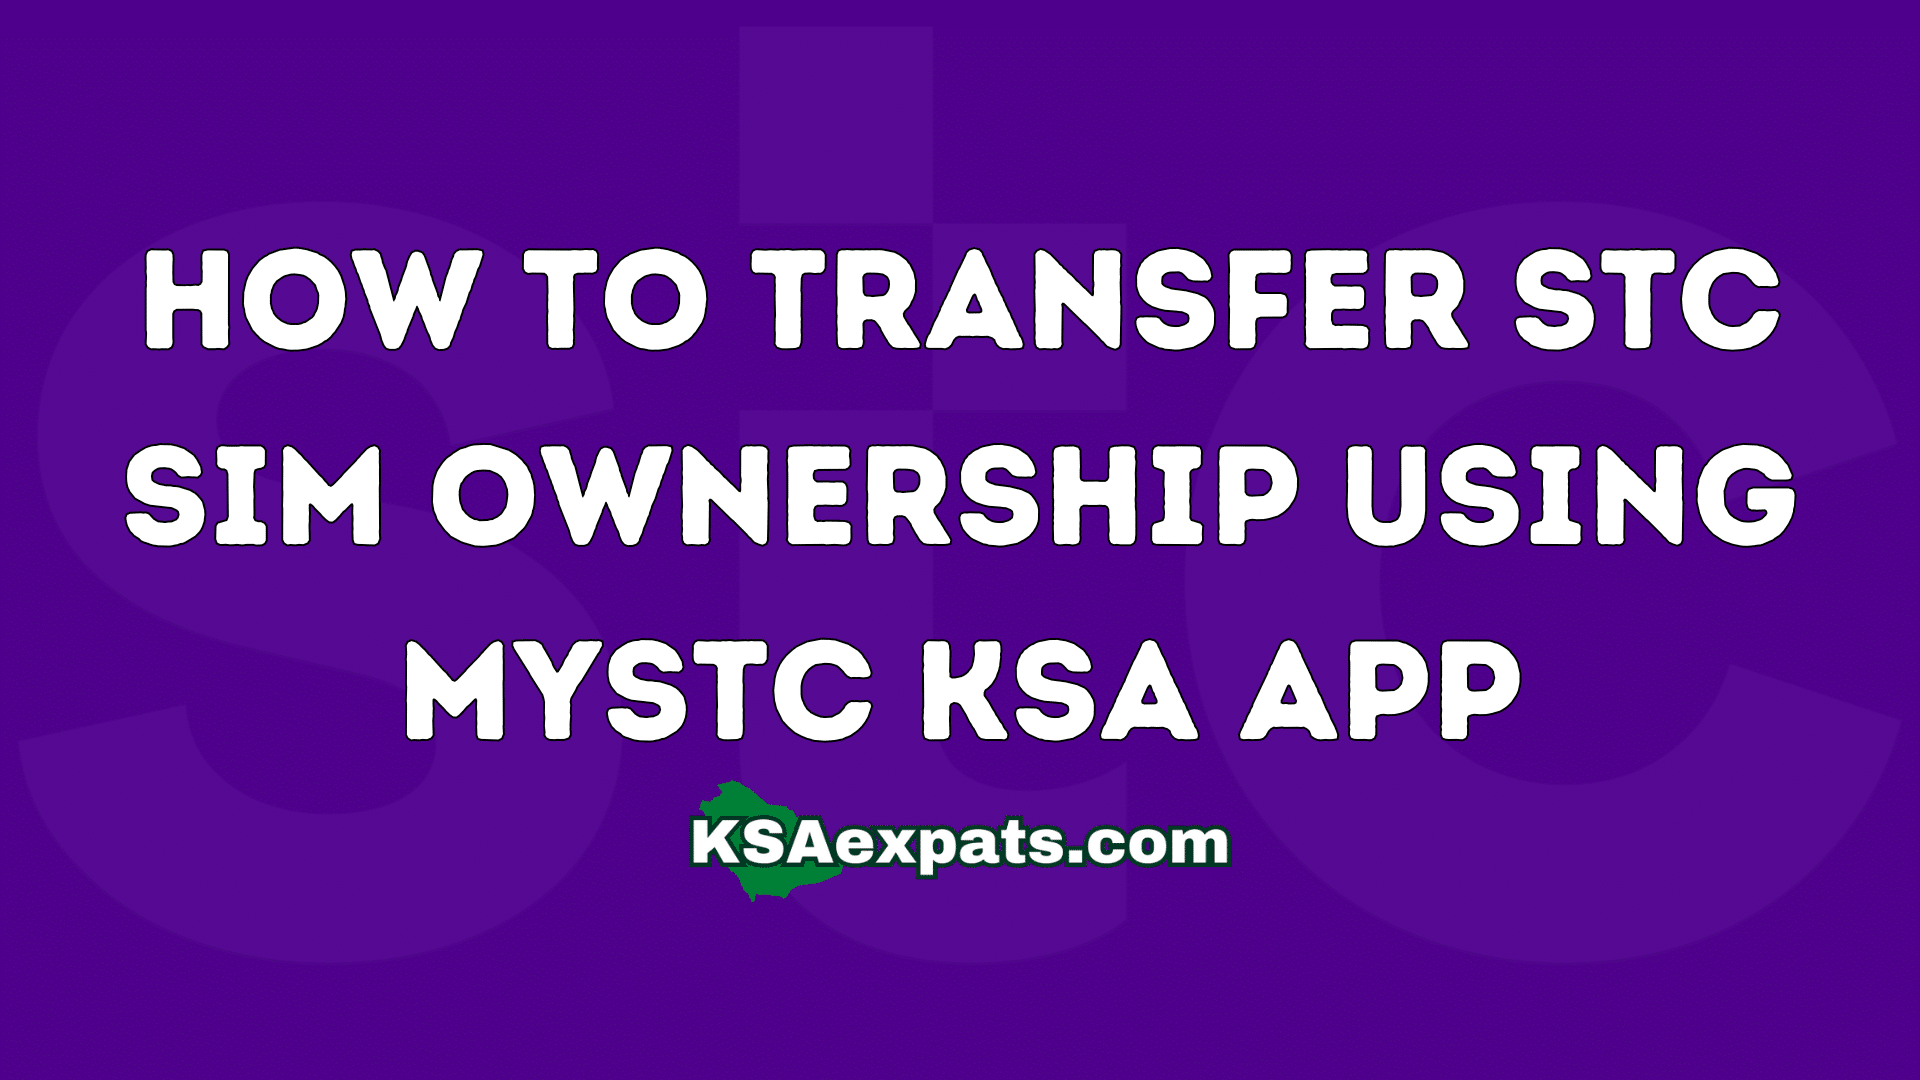 How to Transfer STC SIM Ownership Using My STC App